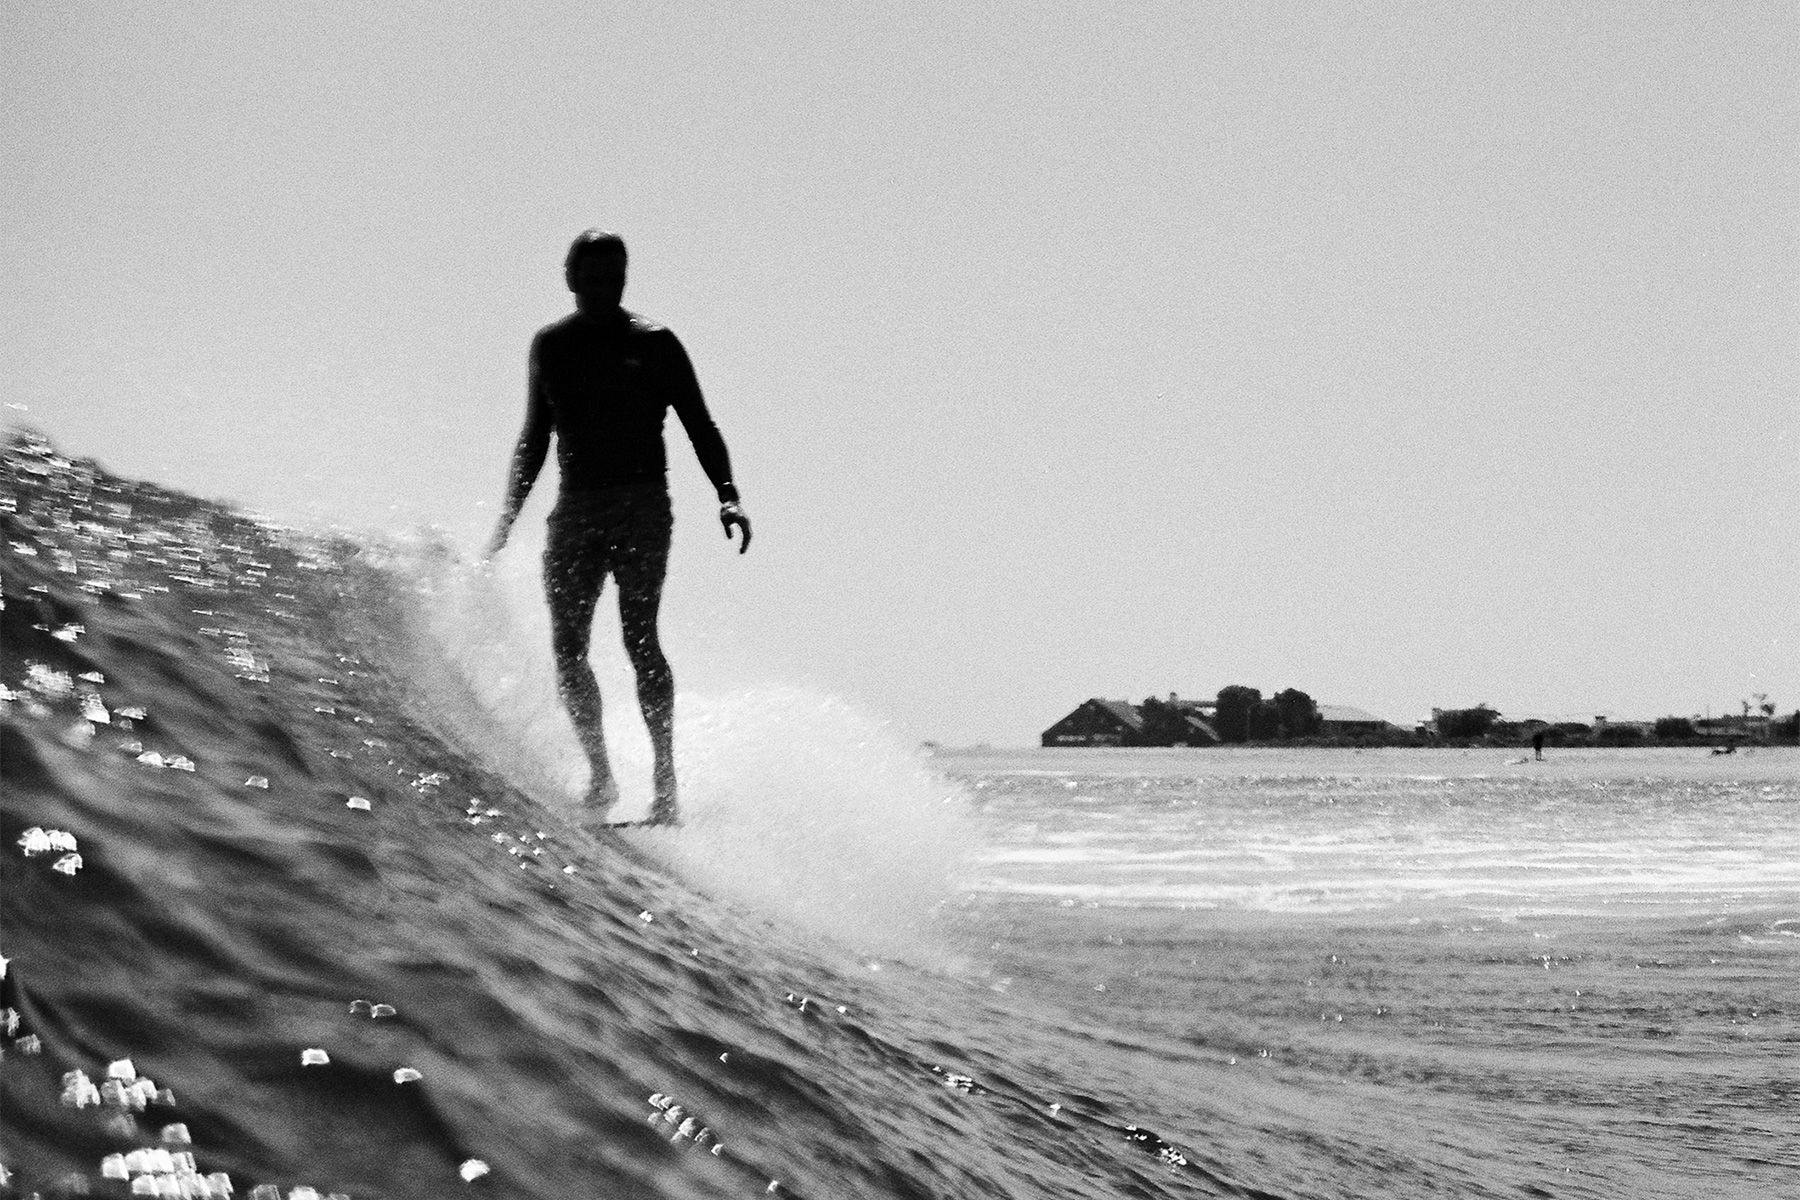 devon howard noseride in black and white captured on nikonos by grant musso